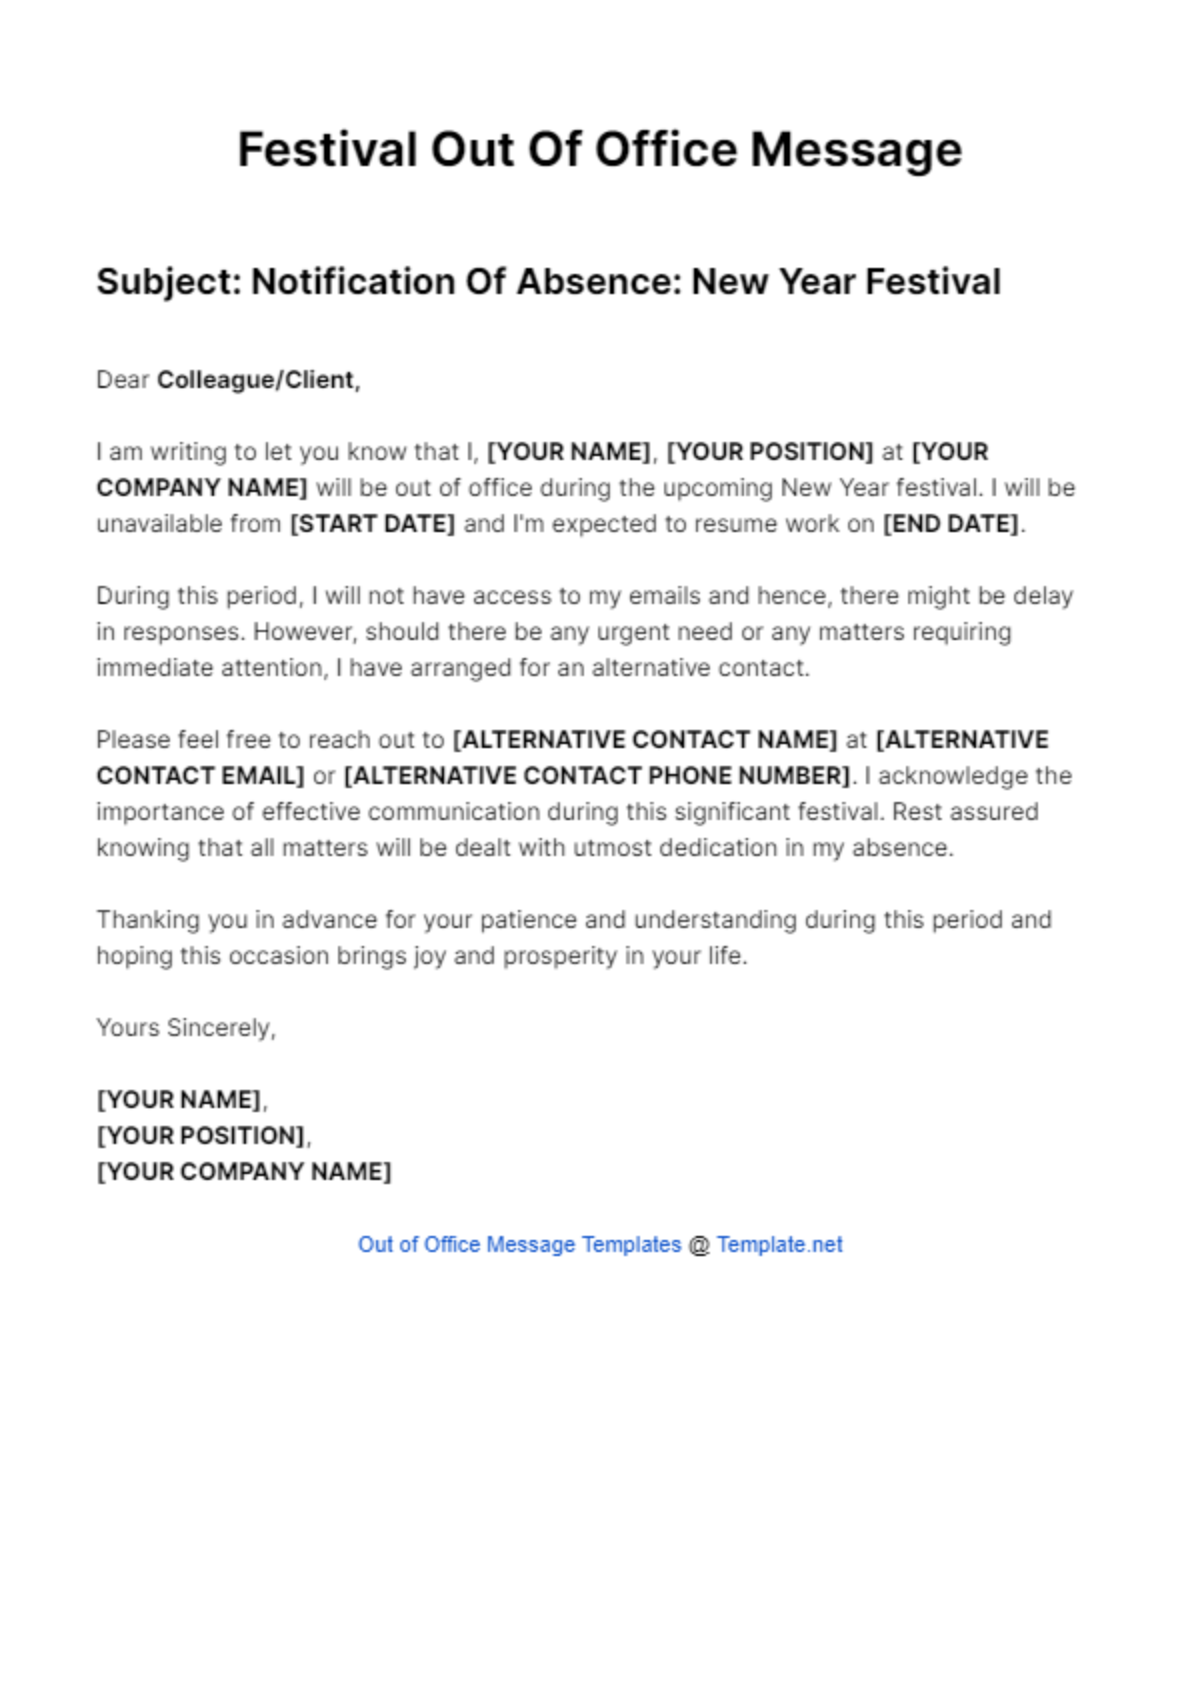 Festival Out Of Office Message Template